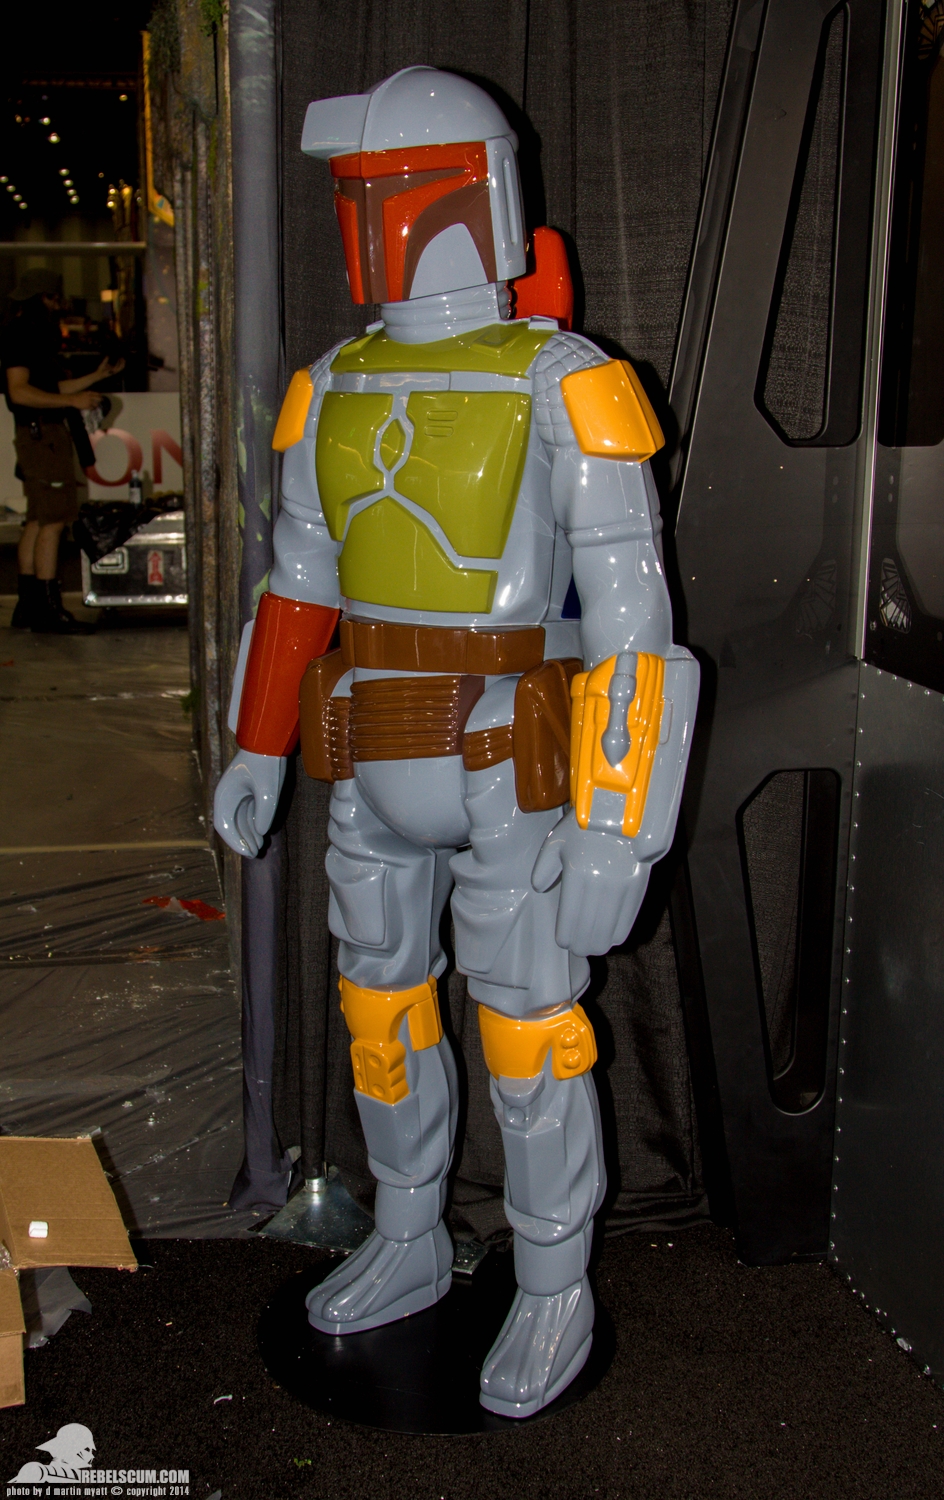 SDCC-2014-Gentle-Giant-Life-Size-Kenner-Boba-Fett-First-Look-001.jpg